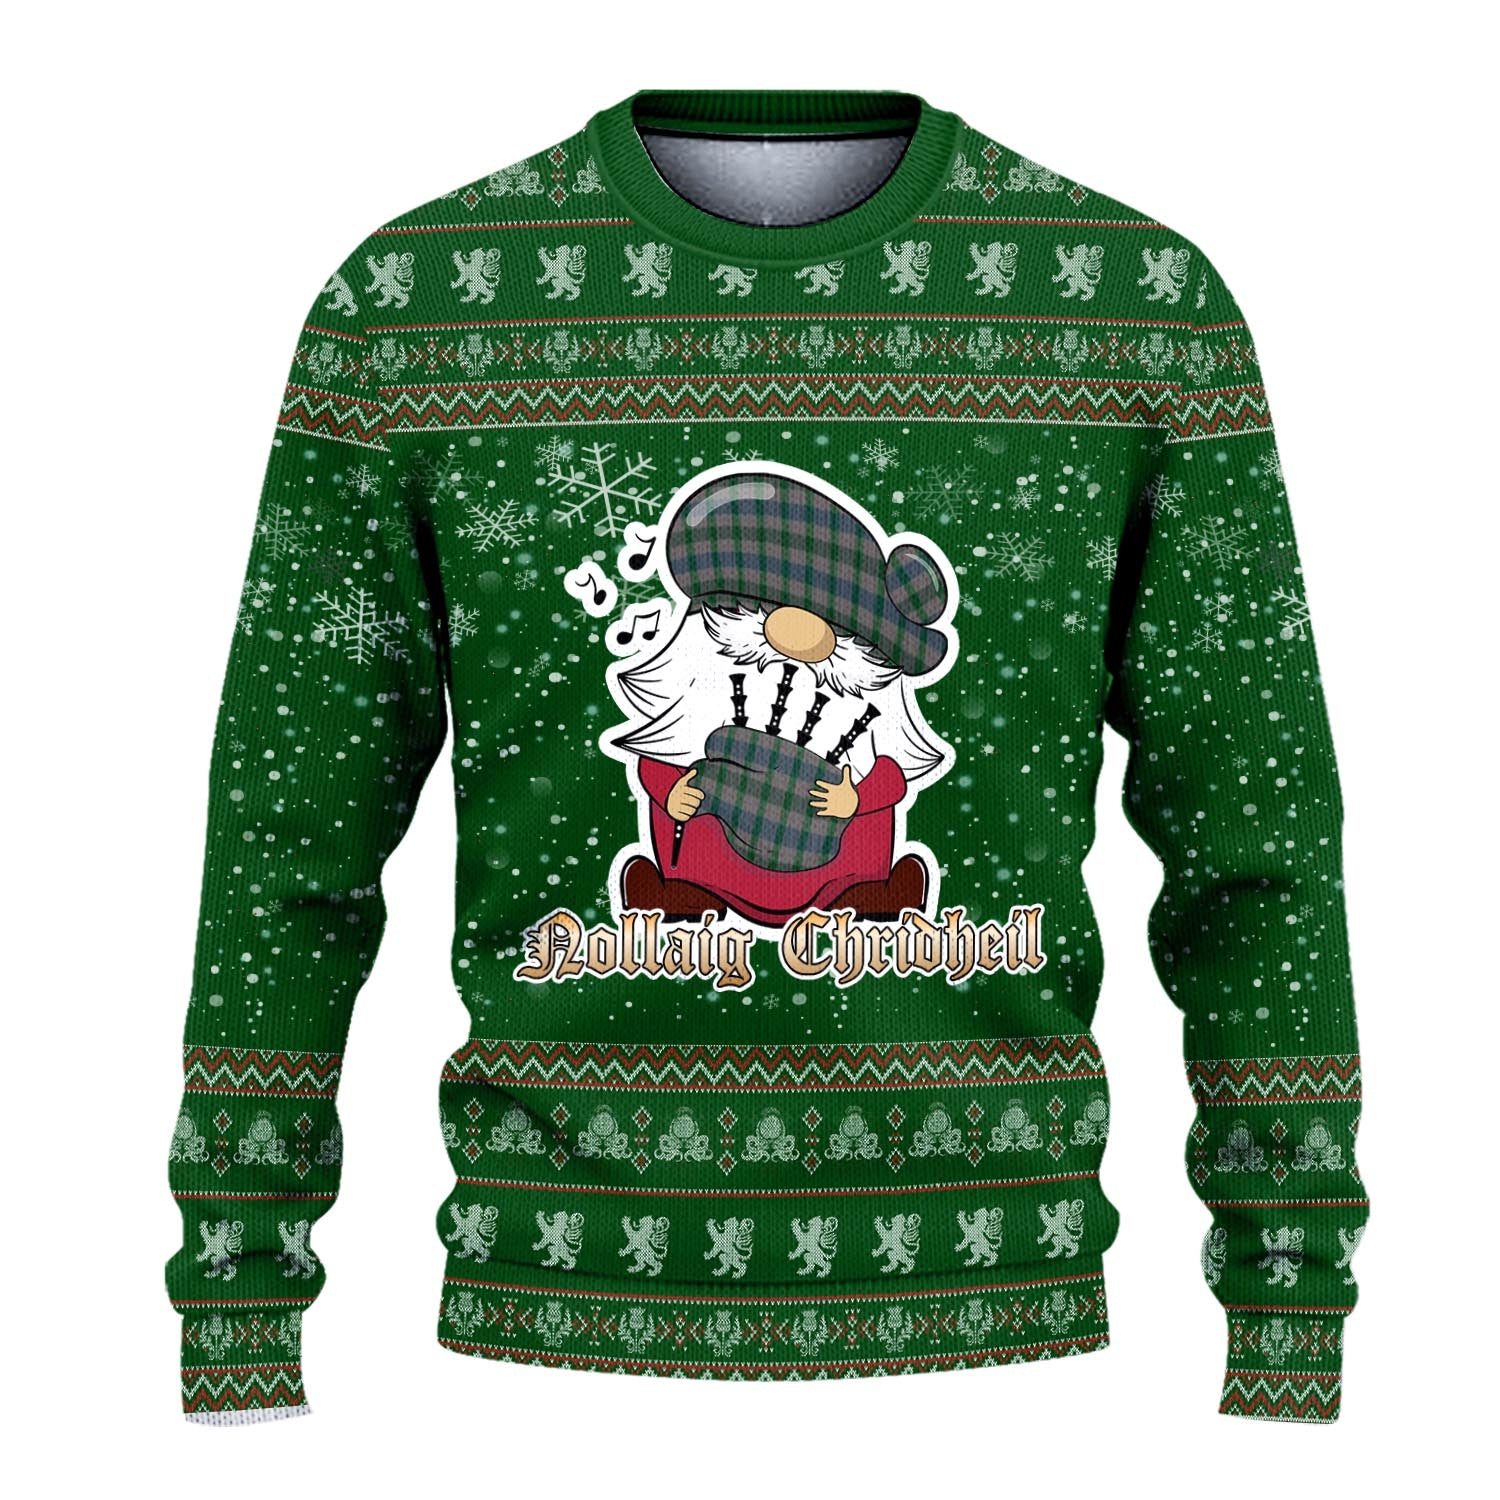 Lloyd of Wales Clan Christmas Family Knitted Sweater with Funny Gnome Playing Bagpipes - Tartanvibesclothing